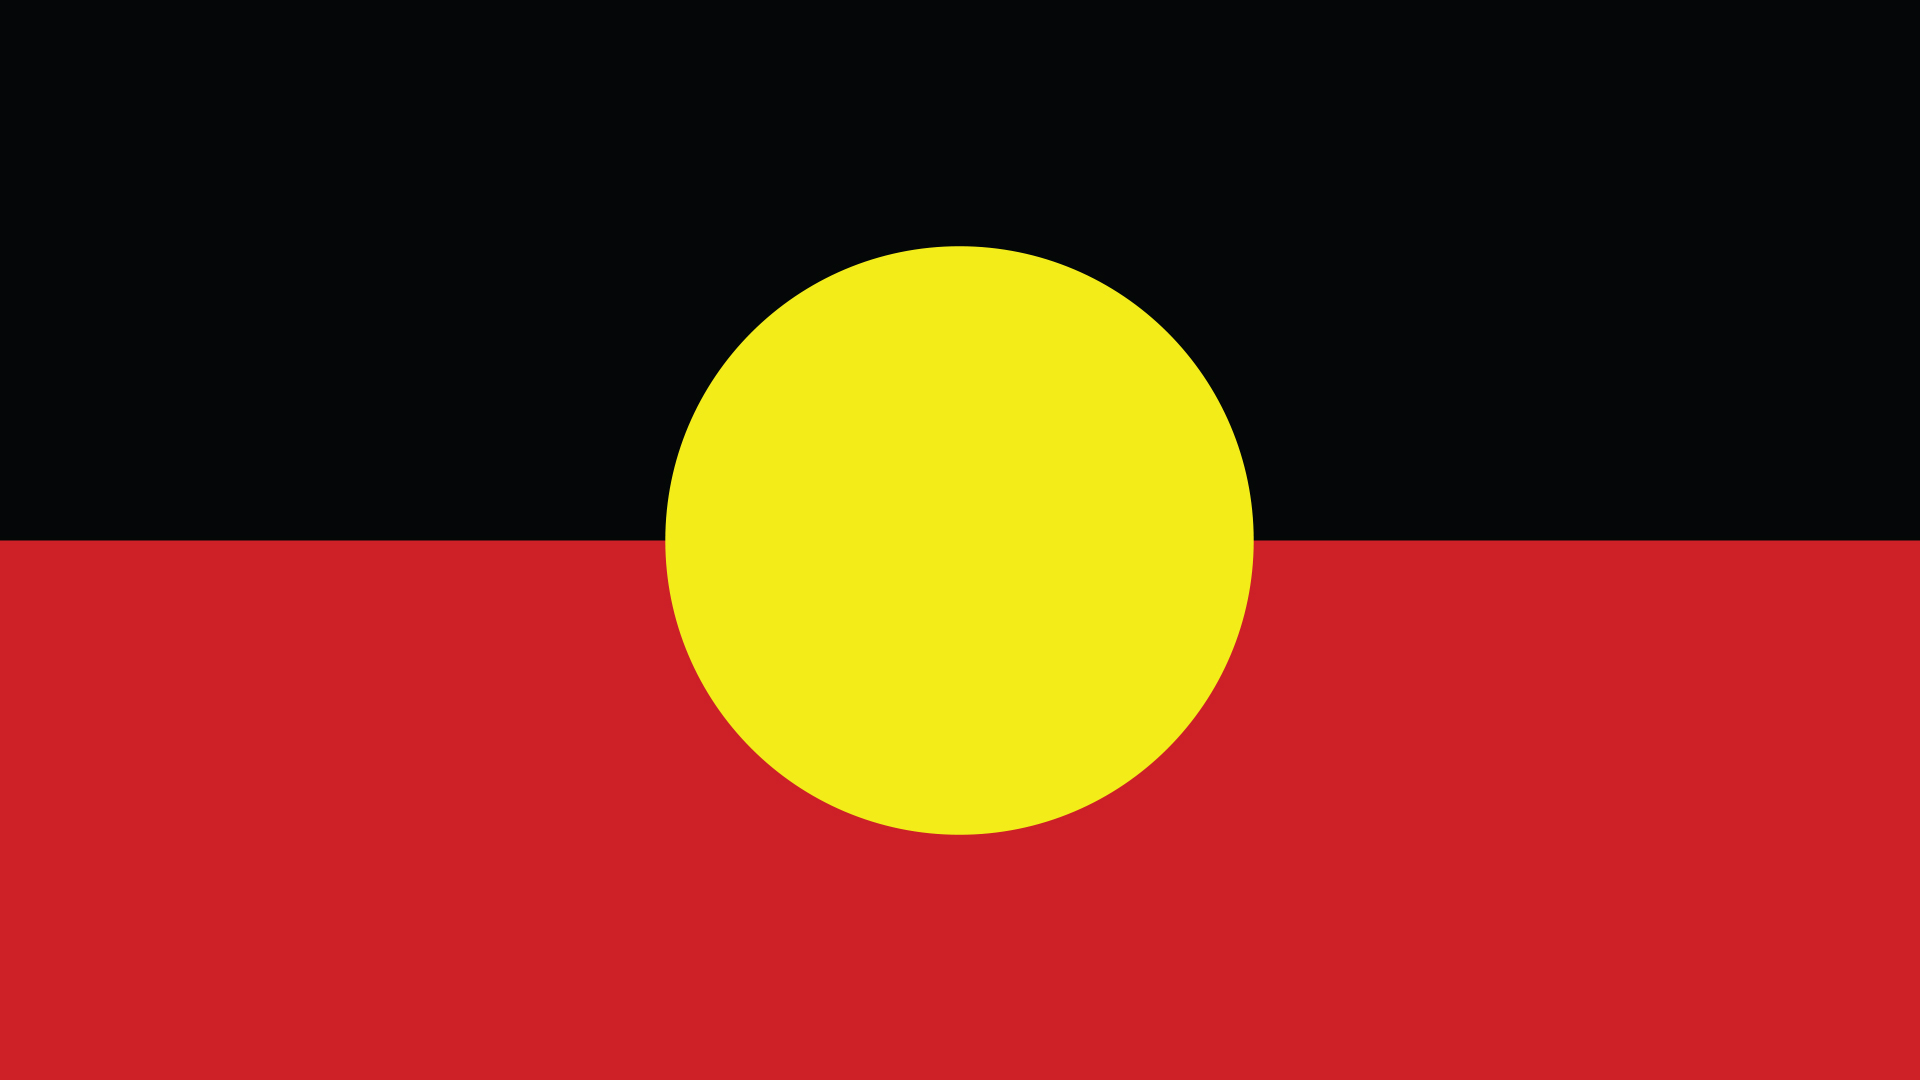 A red, black and yellow flag